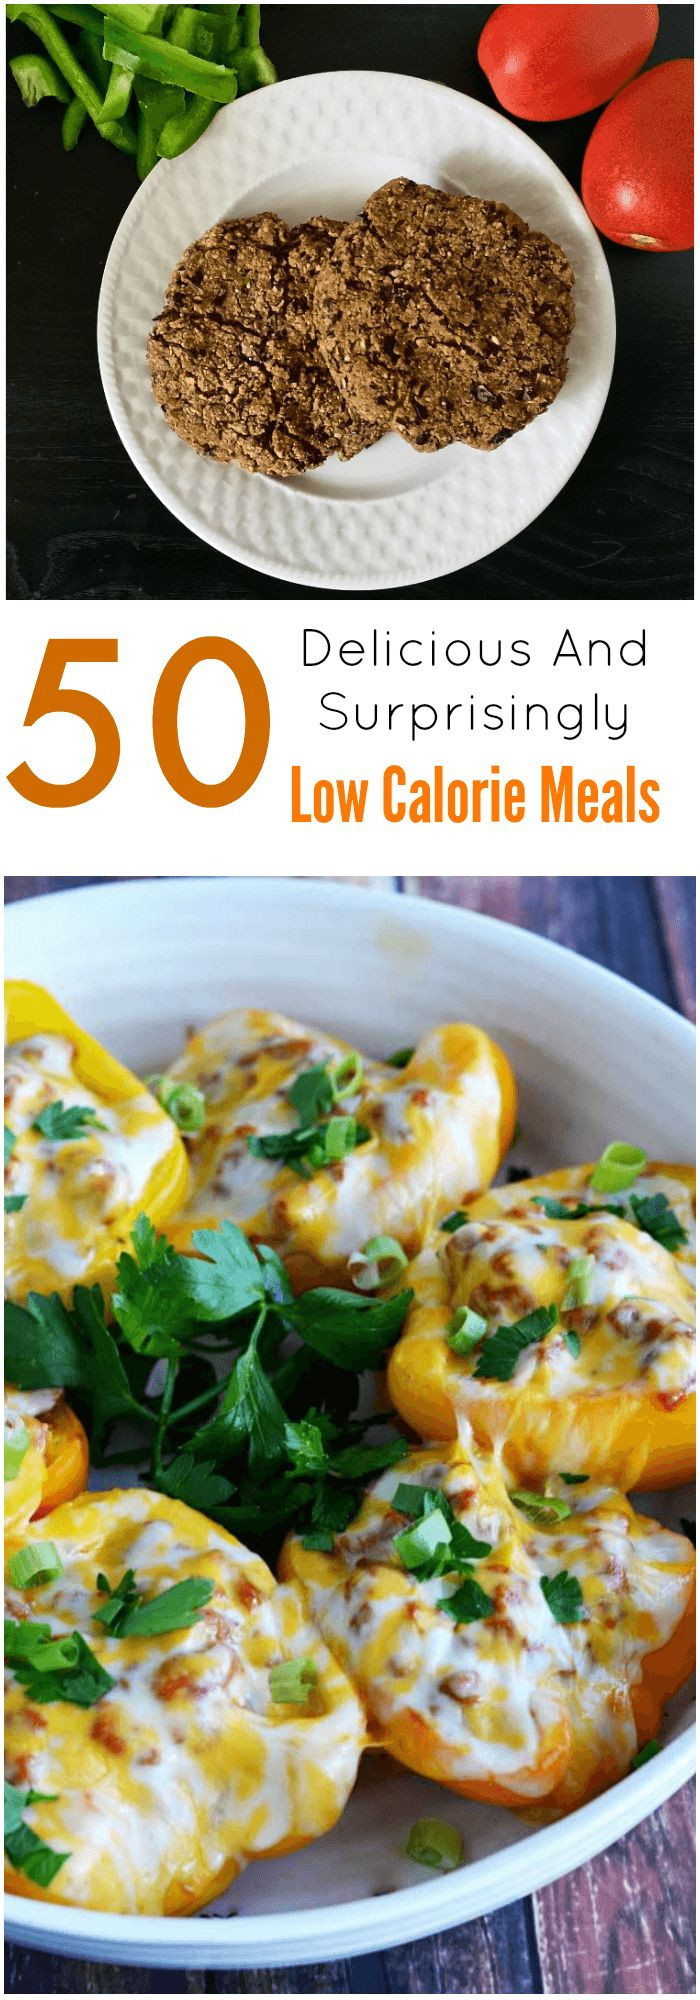 Low Calorie Recipes For Dinner
 50 Delicious And Surprisingly Low Calorie Meals